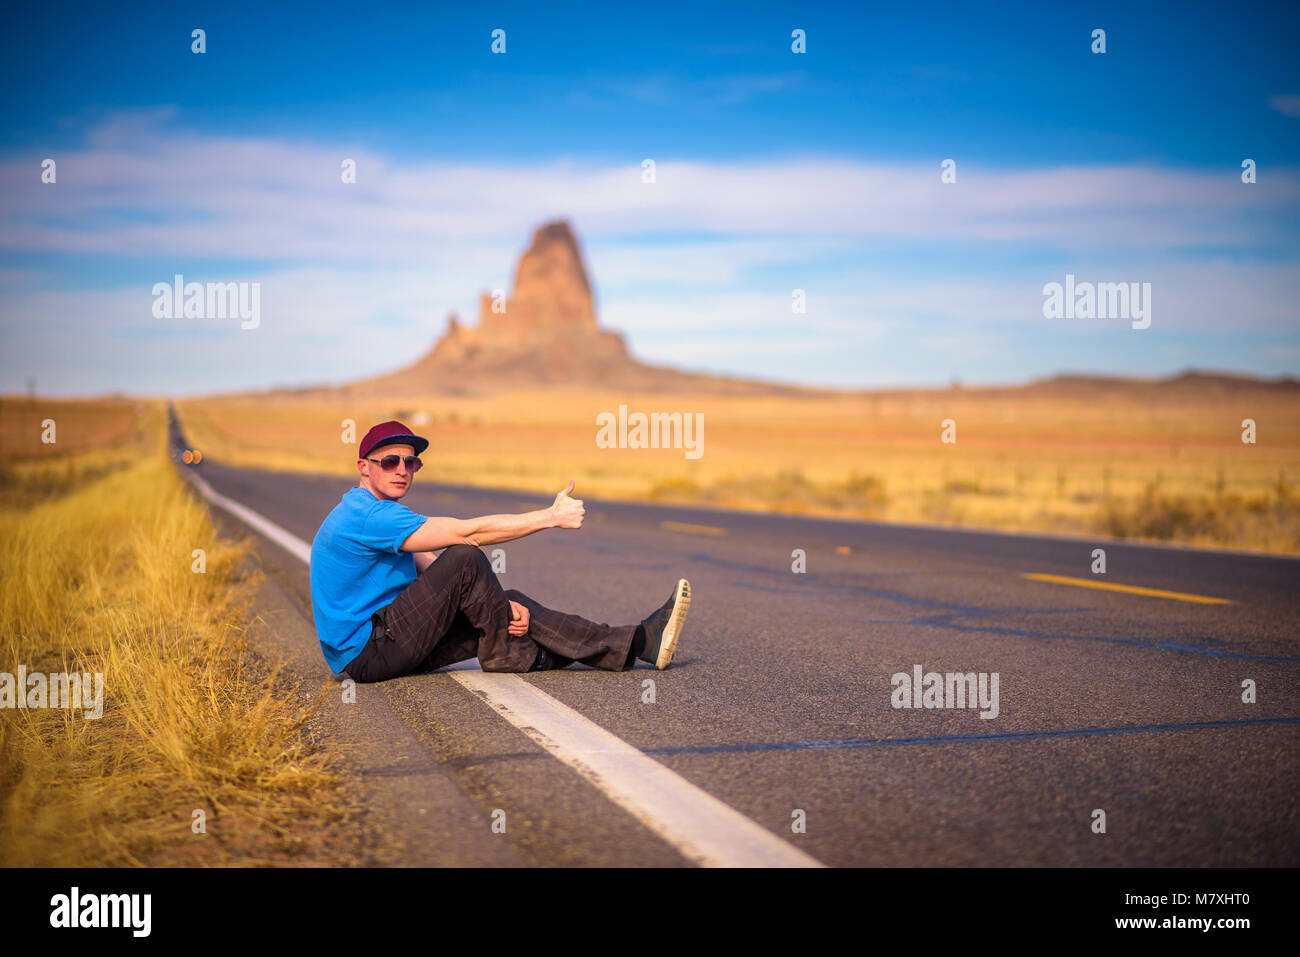 Tired hitch-hiker sitting on a road Stock Photo